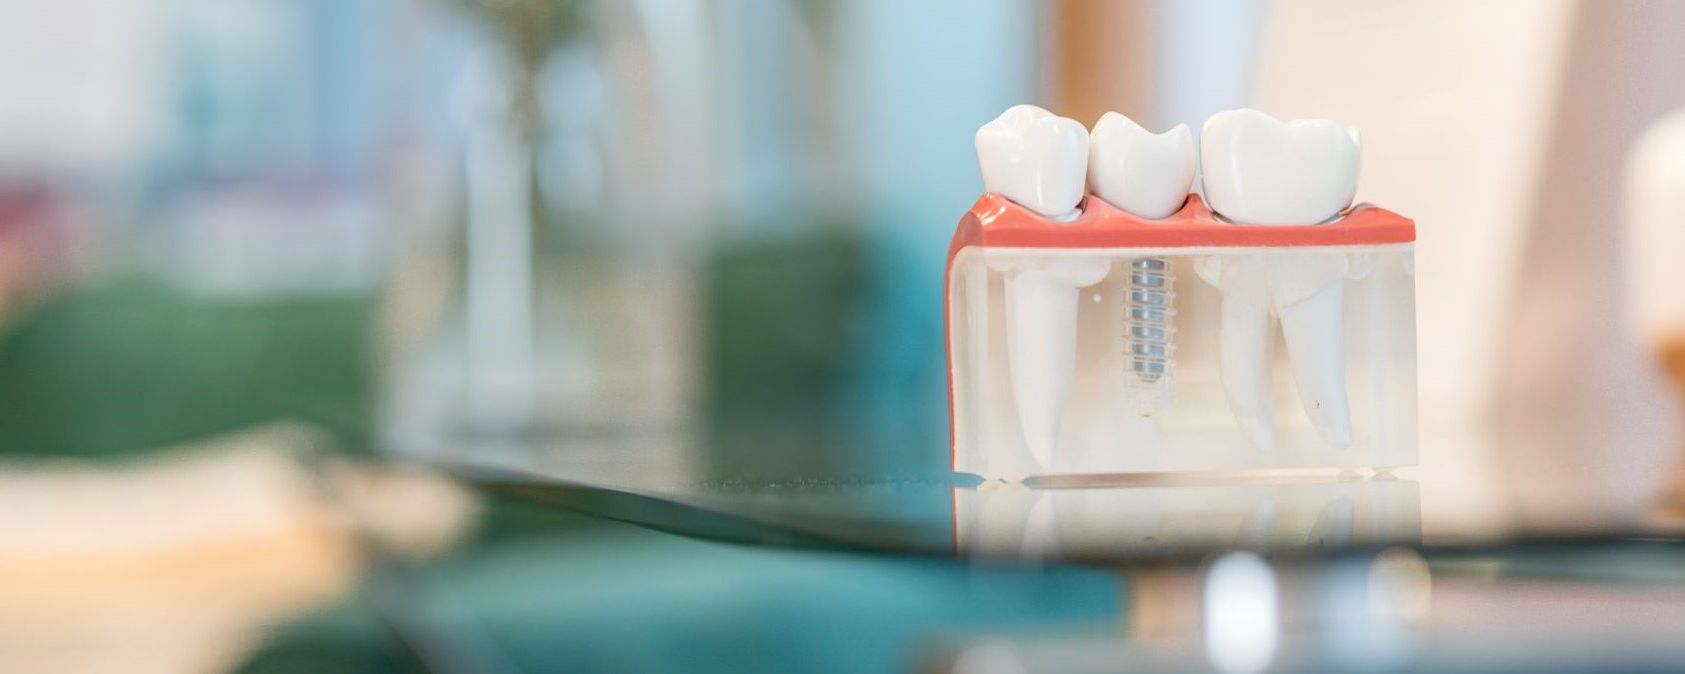 Dental Implants. Are They Worth It?